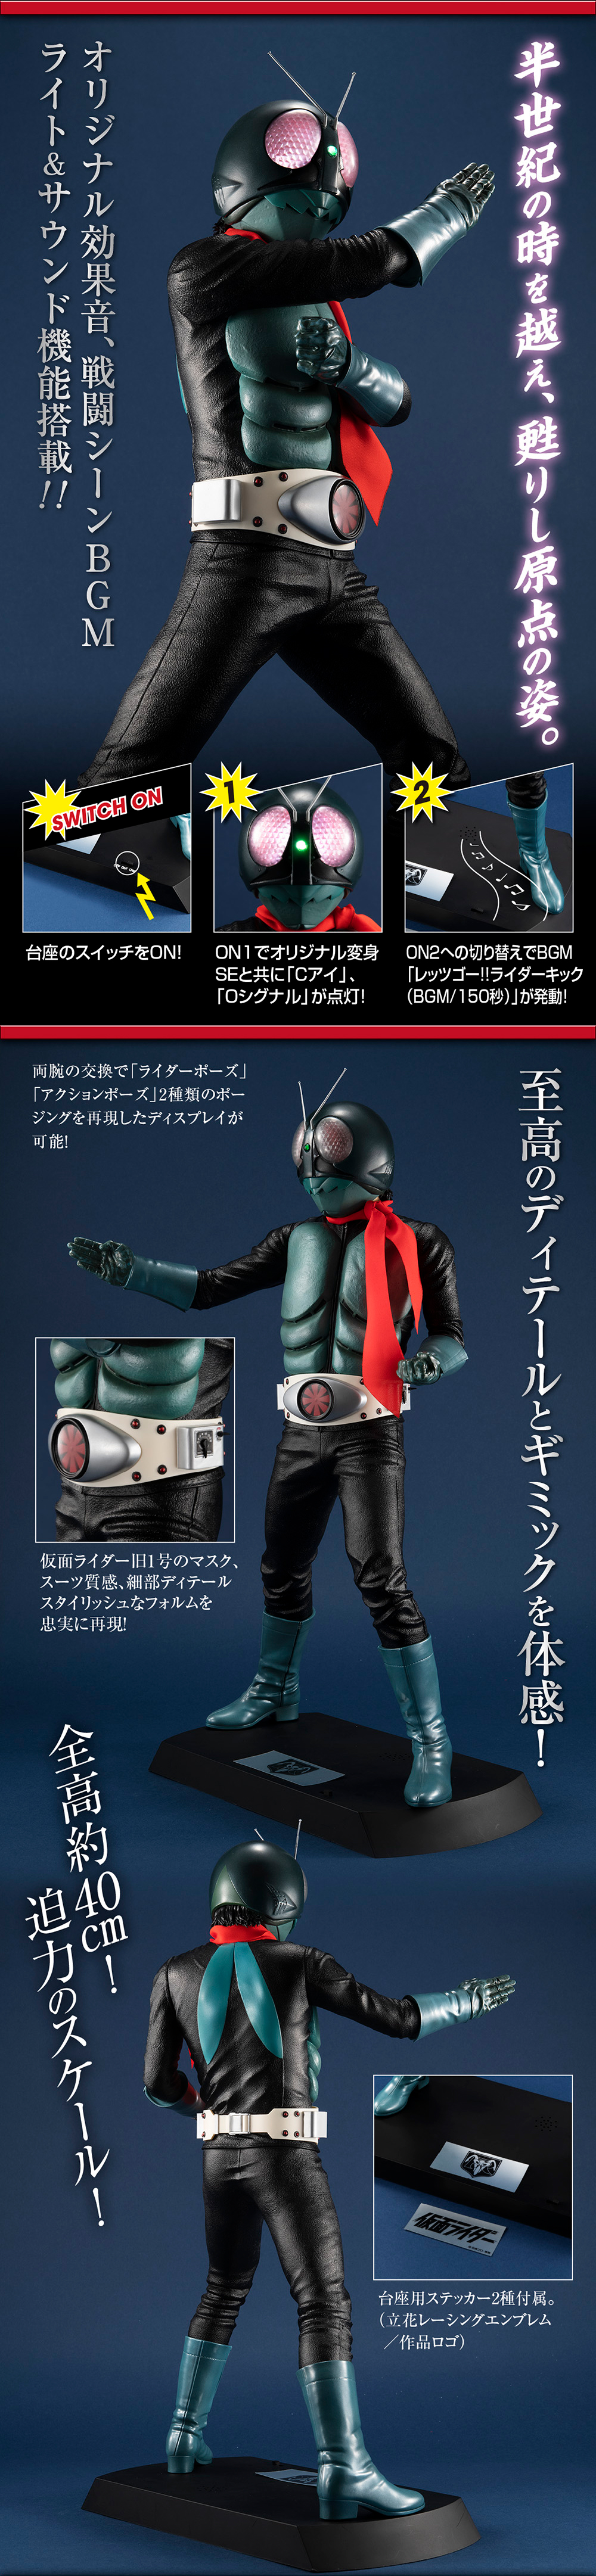 Ultimate Article Ultimate Article 仮面ライダー旧1号